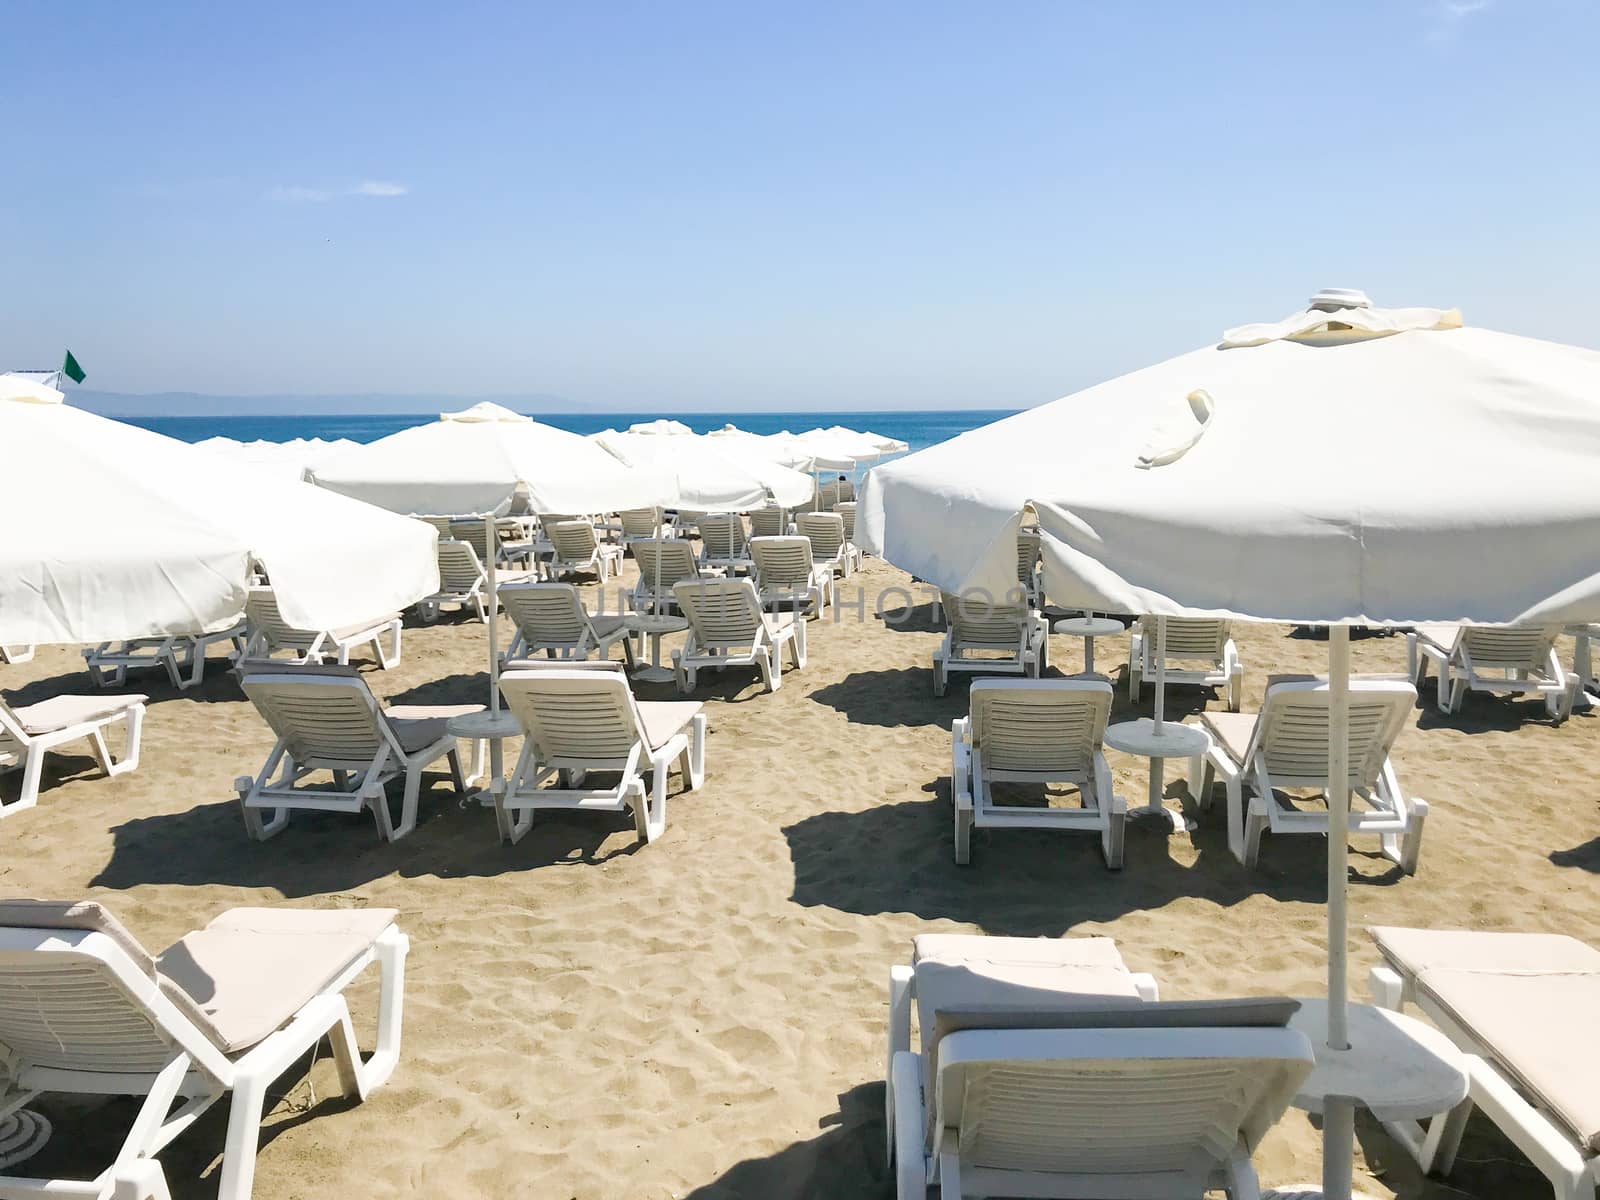 White Loungers And Umbrellas At The Beach In Pomorie, Bulgaria. by nenovbrothers